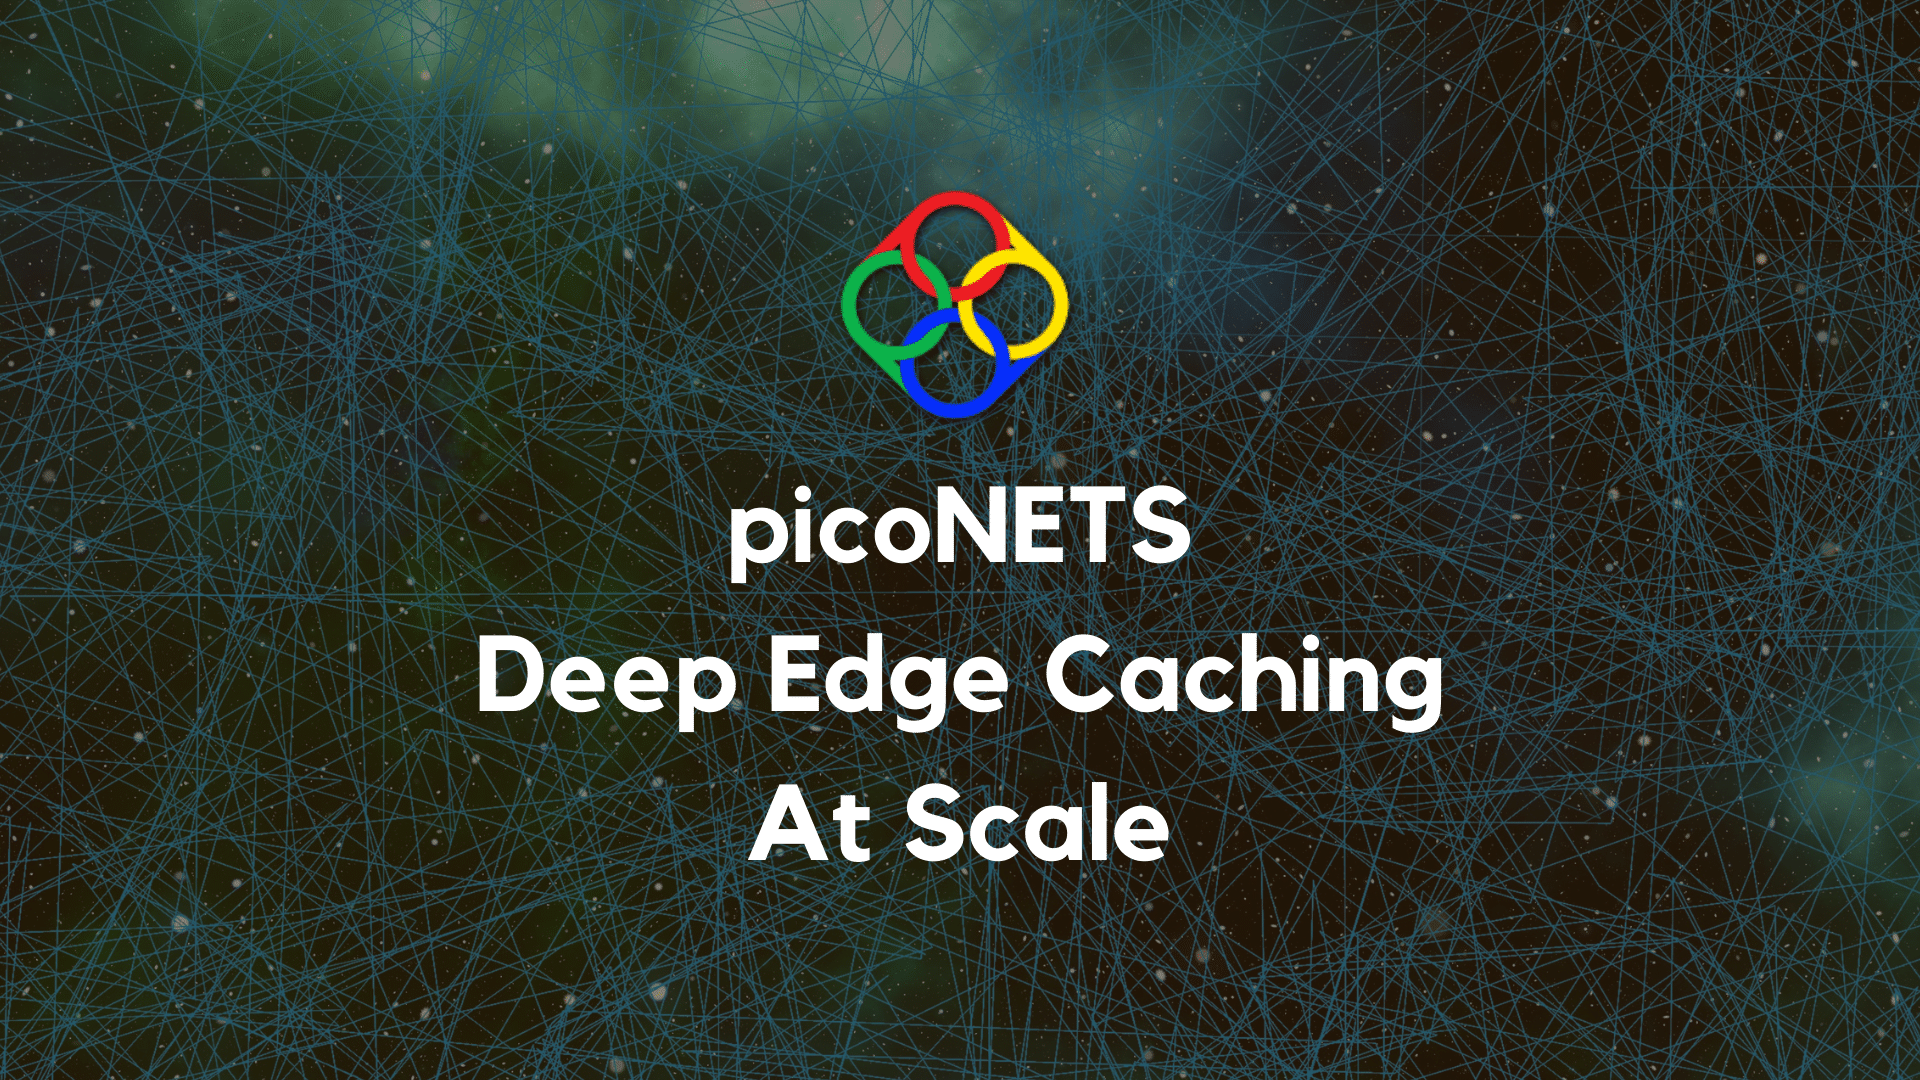 piconets-deep-edge-caching-featured-images